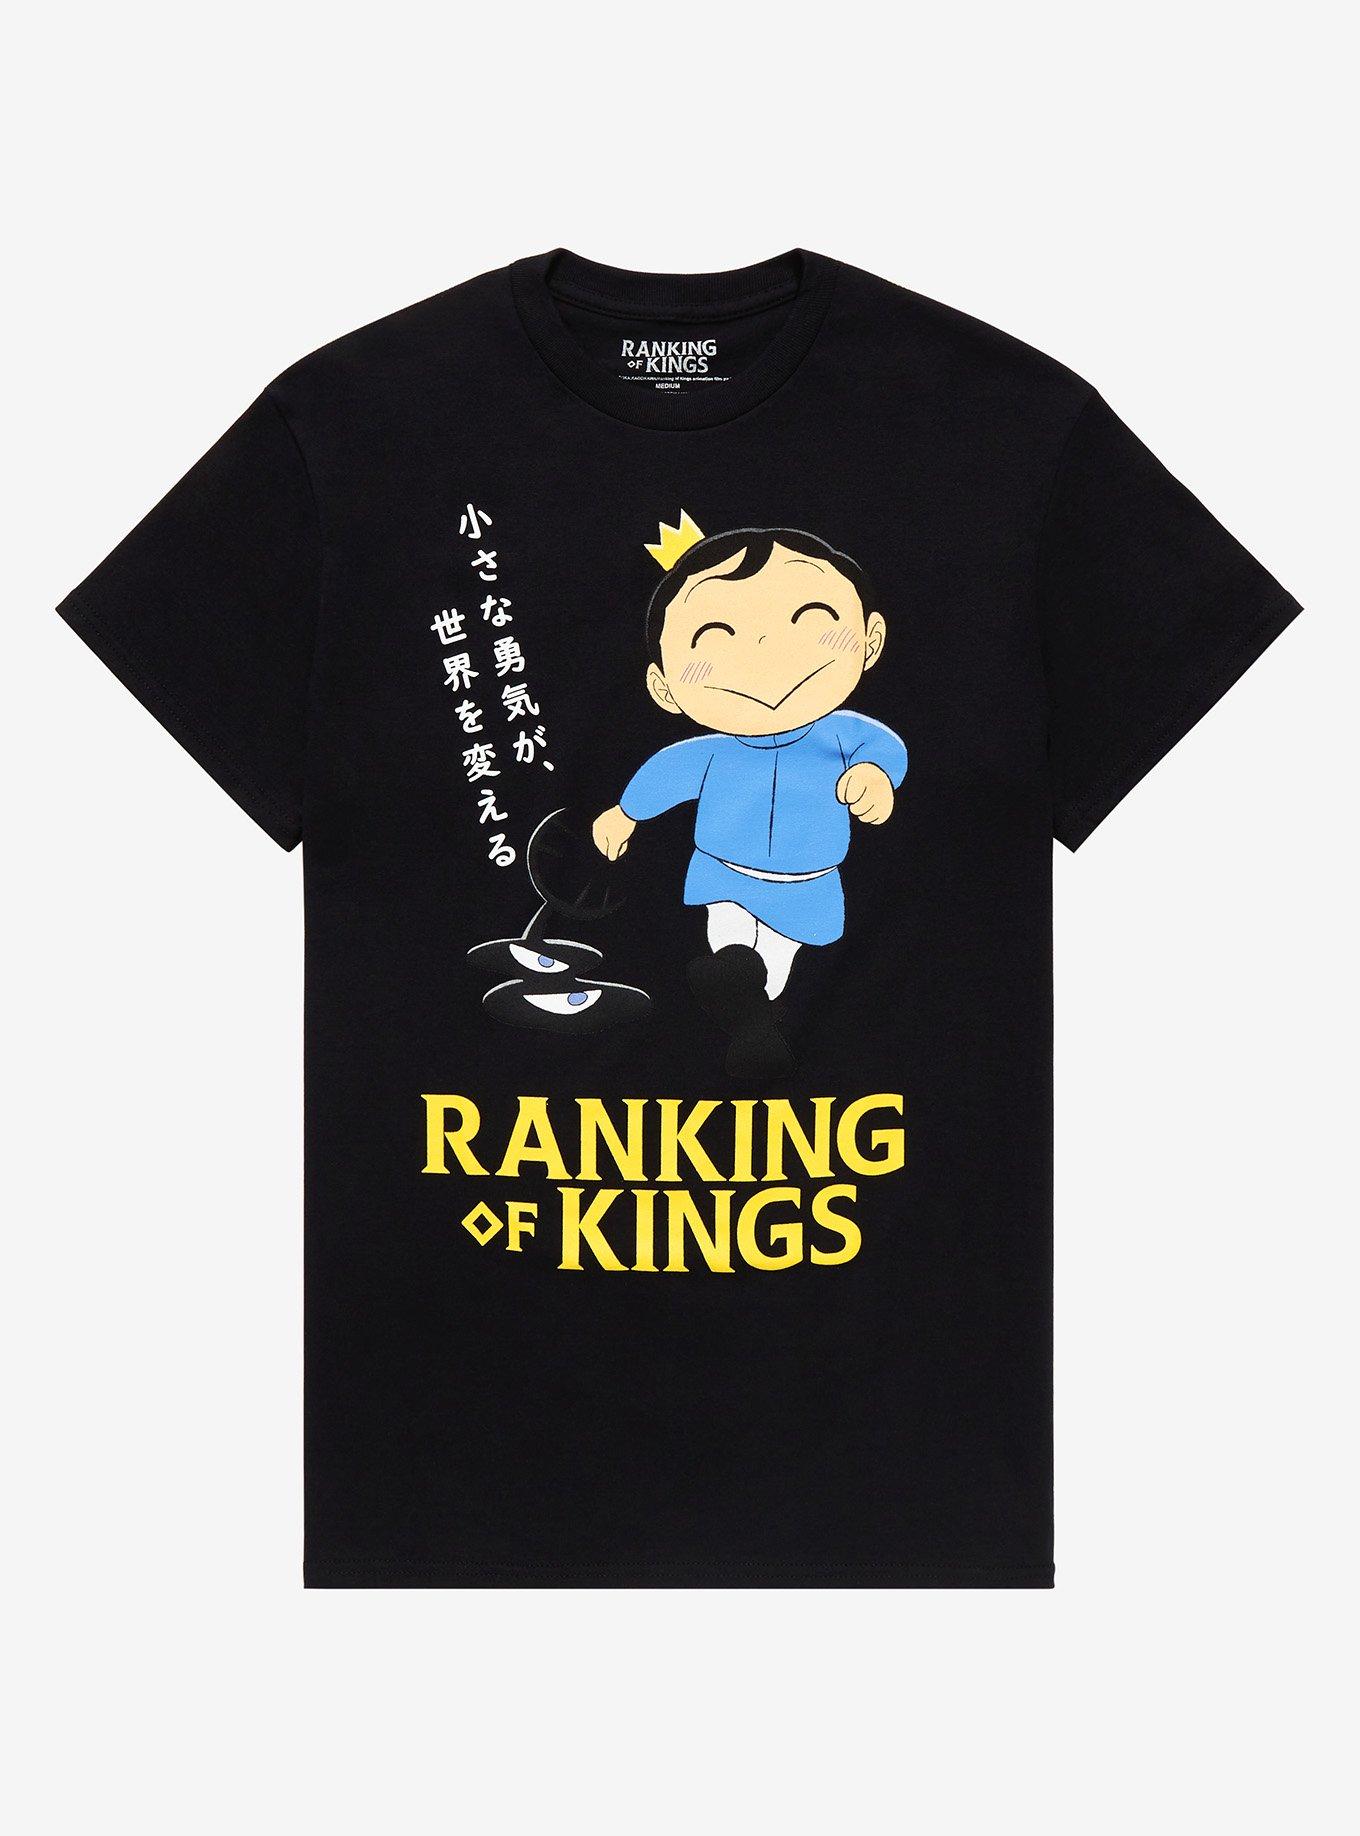 How Old is Bojji in 'Ranking of Kings'? - Culture of Gaming